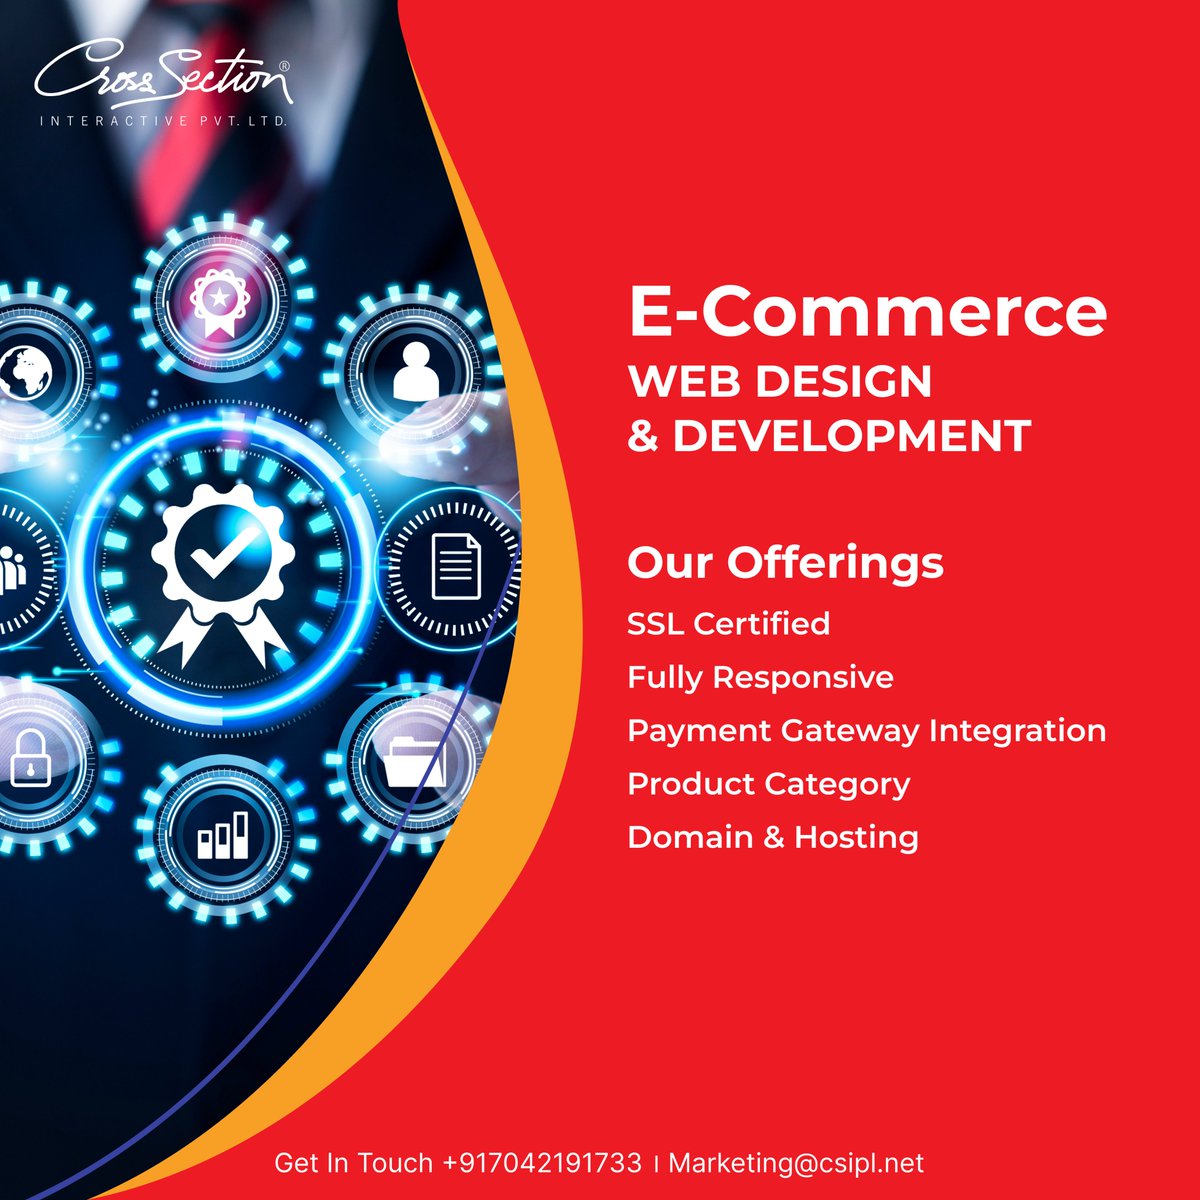 Use creative #ecommerce #websites to stand out from the crowd. Successful #responsivewebsites are given.
#CSIPL will provide #businesses with optimized #ecommercewebsites that will simplify the shopping process and help them lay a solid basis for the future.
#csipl #noida #delhi